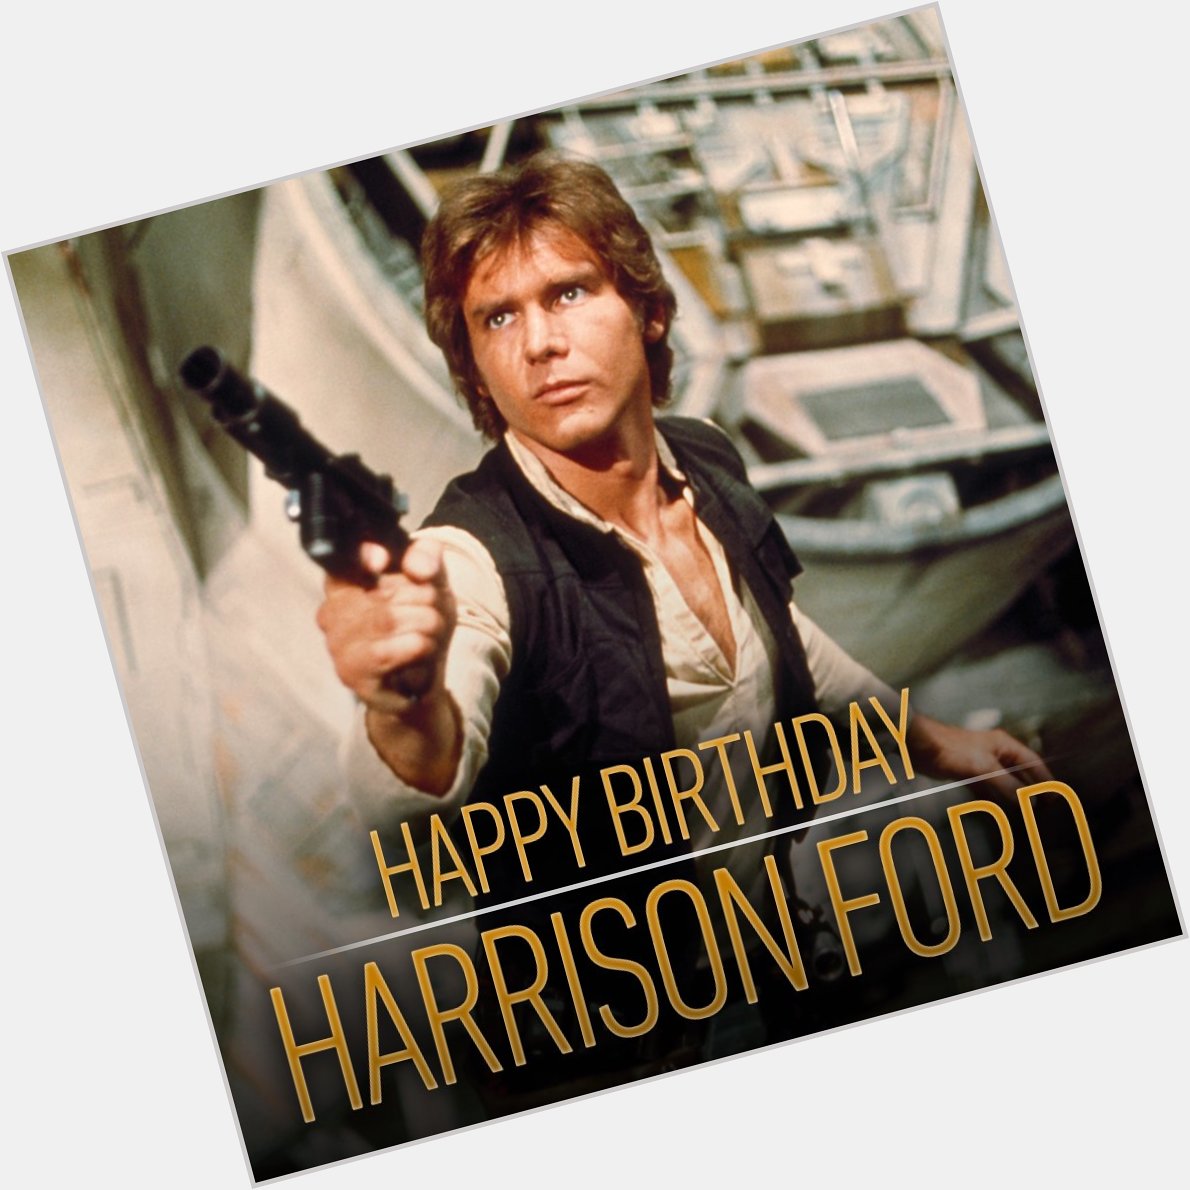 Happy birthday to the galaxy\s favourite scruffy-looking nerf-herder, Harrison Ford! 